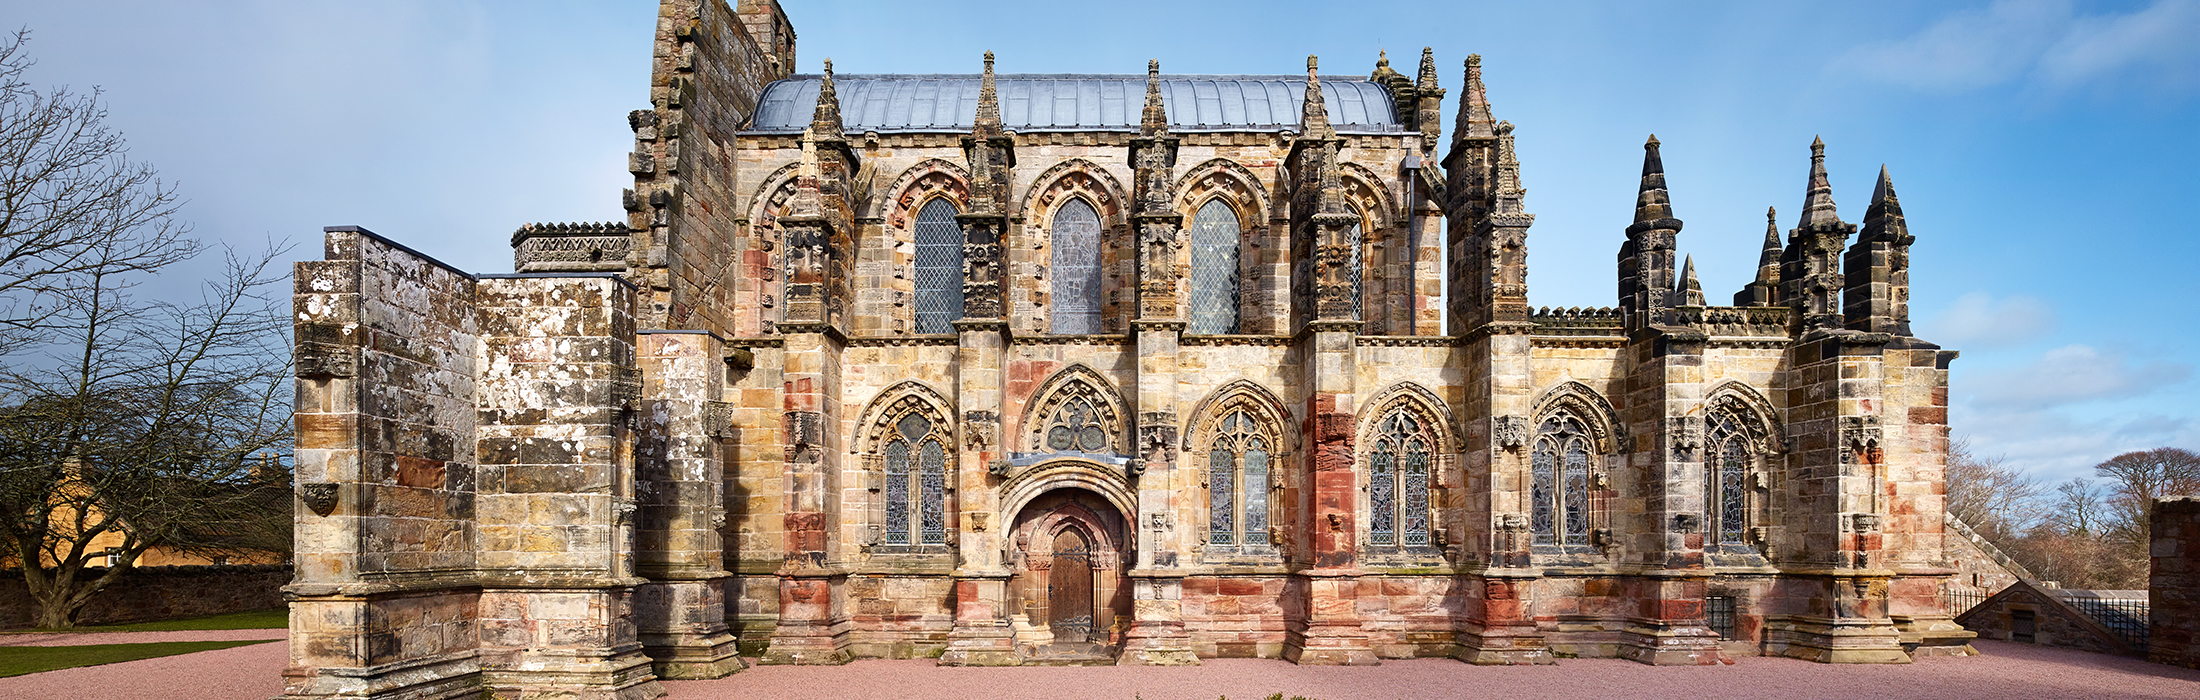 Image result for rosslyn chapel